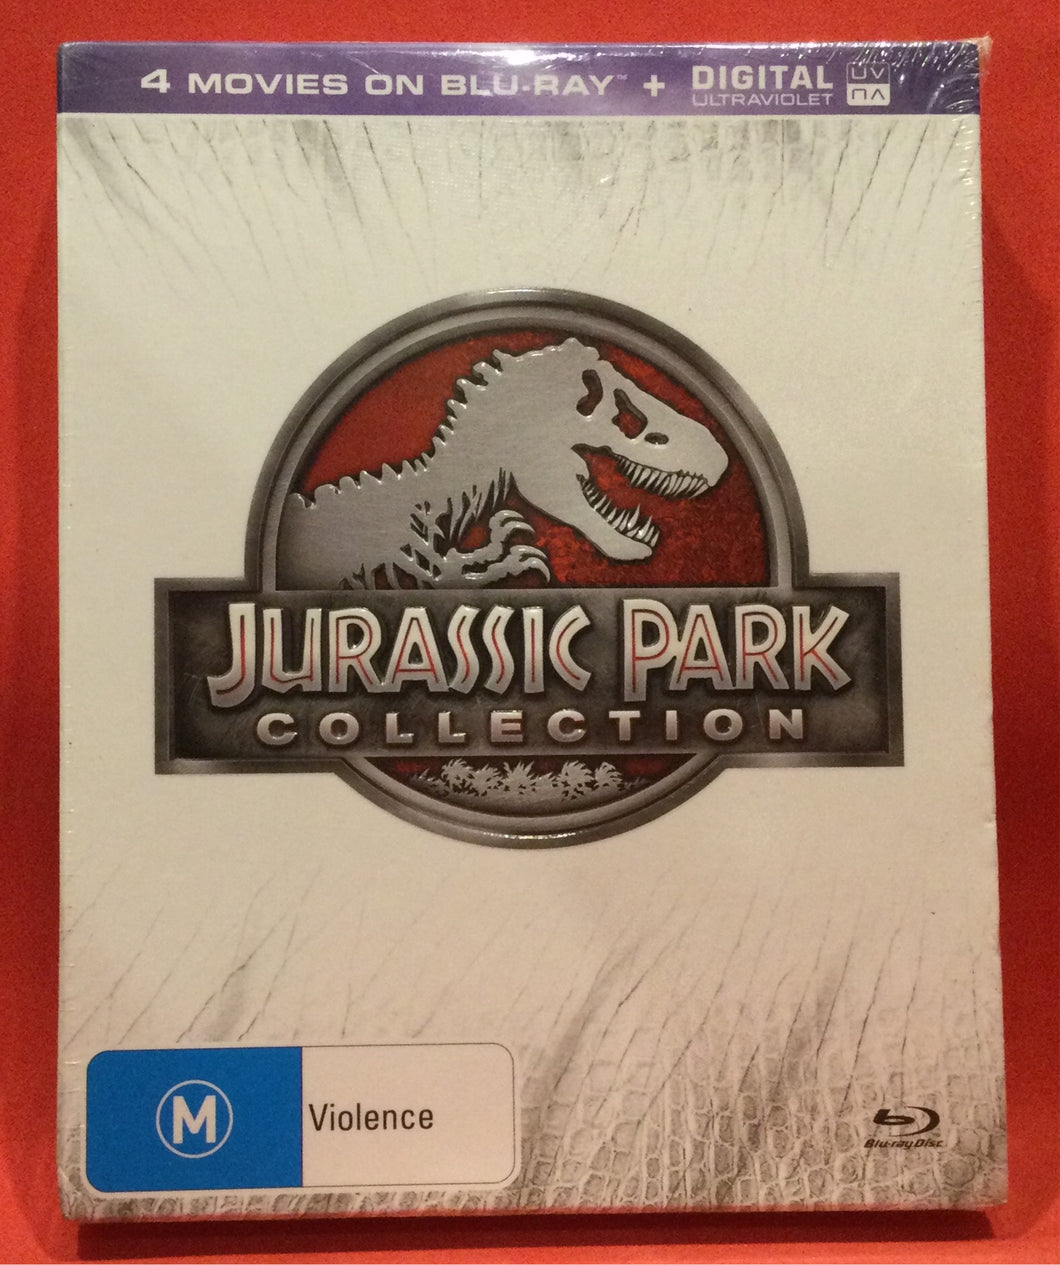 JURASSIC PARK - THE COLLECTION - BLU-RAY - 4 DVD DISCS (SEALED)